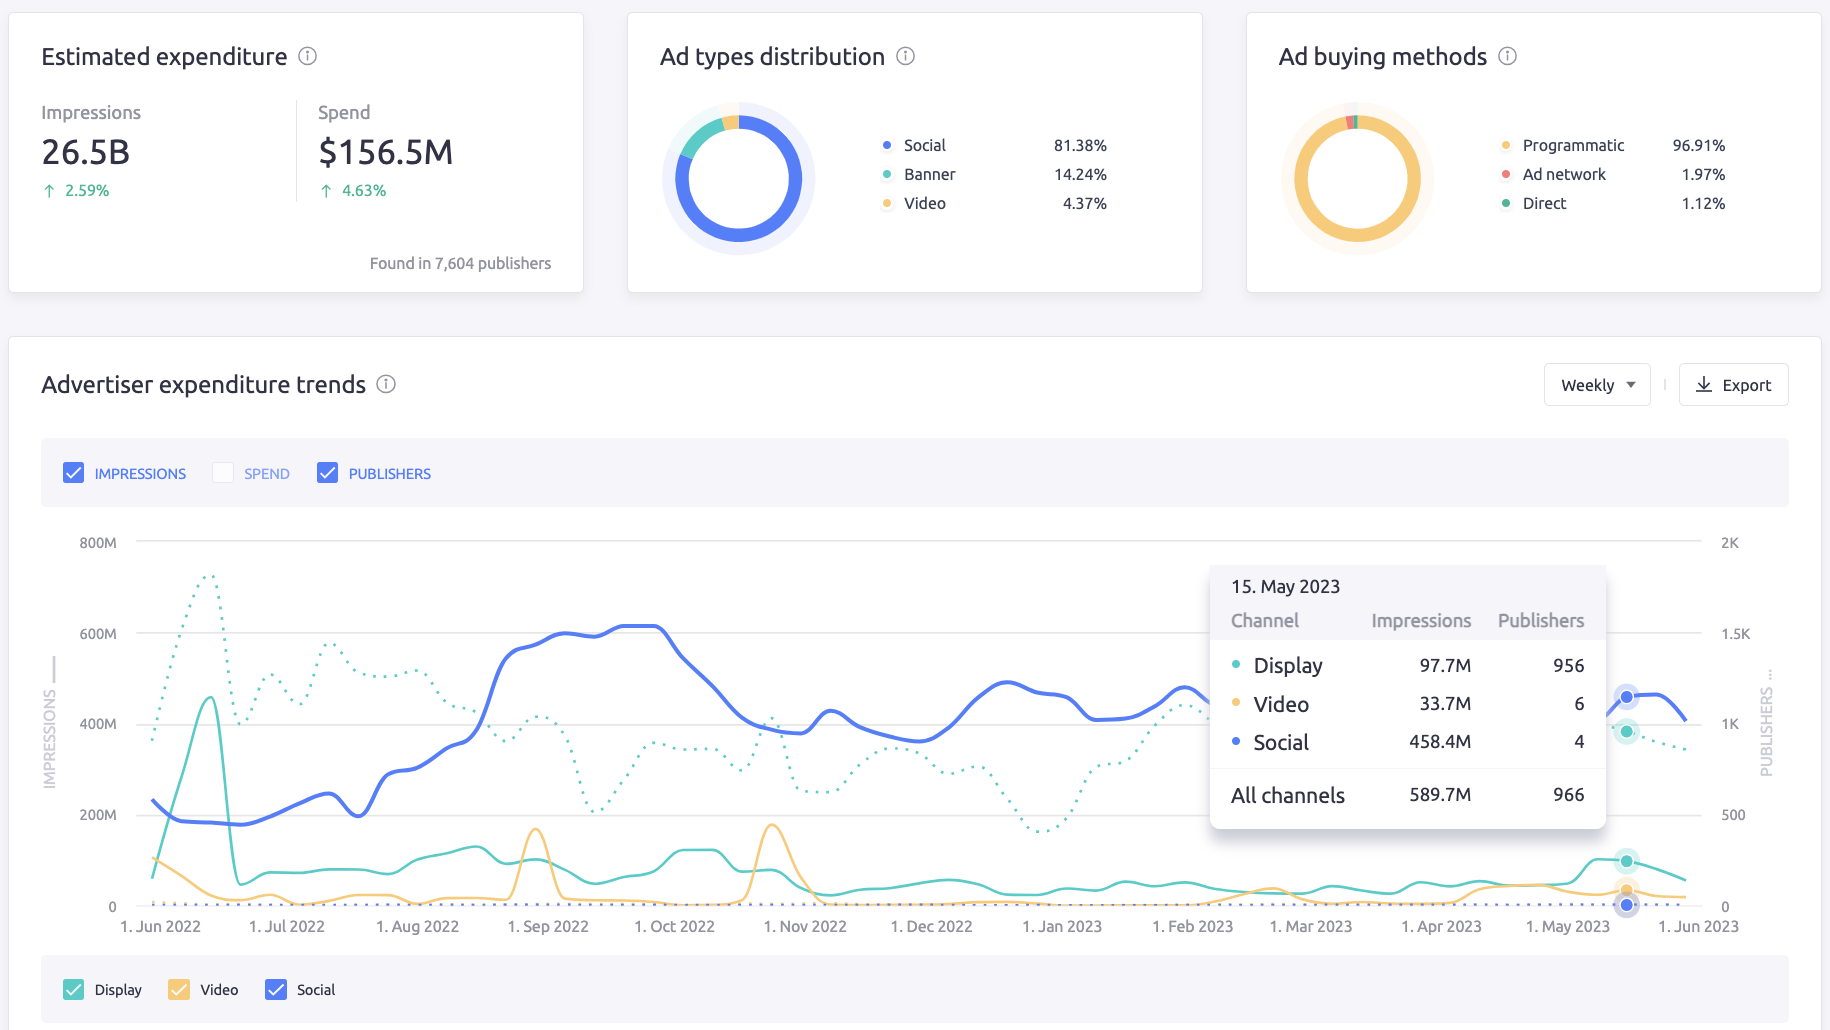 AdClarity - Advertising Intelligence app, showing a brand's estimated ad expenditure, ad types, buying methods, and expenditure trends for three channels (display, video, and social) over a twelve month period.